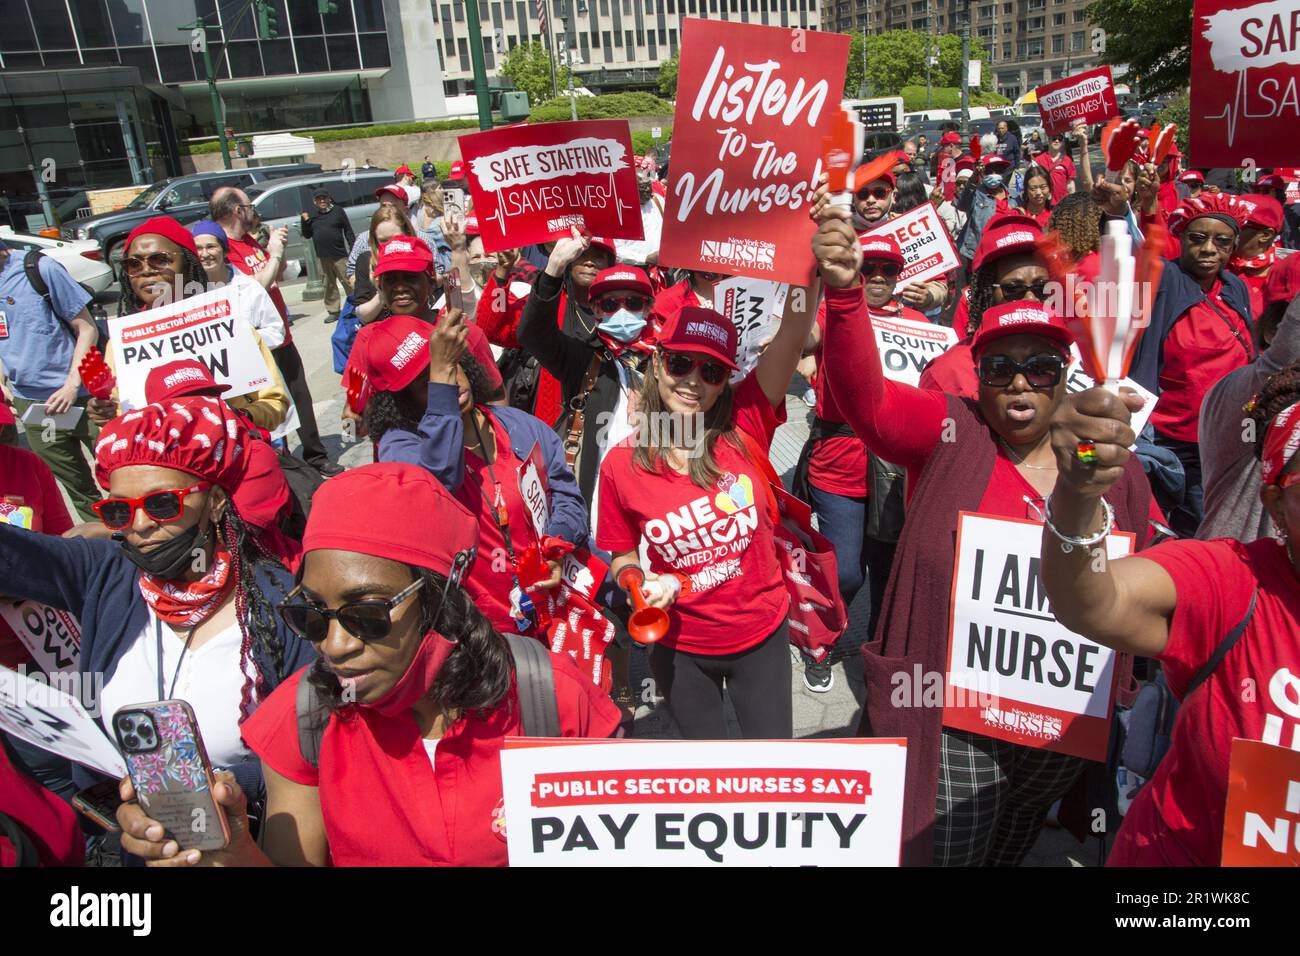 On Wednesday, May 10th, 2023 NYSNA (NY State Nurses Assoc. members) who work for NYC public hospitals and Mayoral agencies held a rally at Foley Square to sound the alarm on the crisis of understaffing and high turnover that threatens care for the vulnerable patients who depend on our city’s public health system. Nurses are calling for pay equity as a matter of healthcare and racial justice. Stock Photo